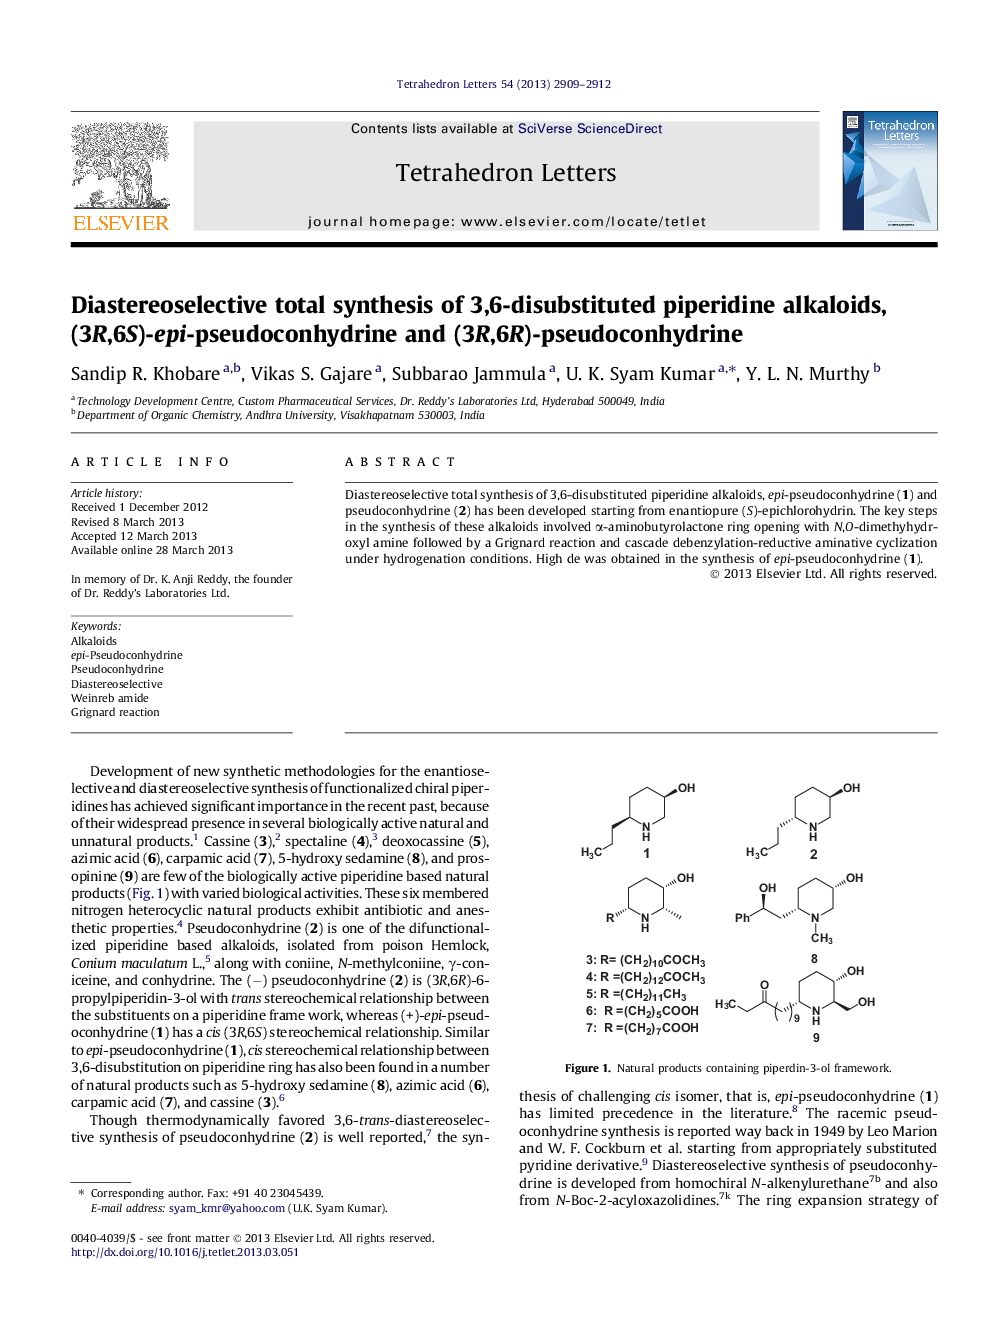 Diastereoselective total synthesis of 3,6-disubstituted piperidine alkaloids, (3R,6S)-epi-pseudoconhydrine and (3R,6R)-pseudoconhydrine